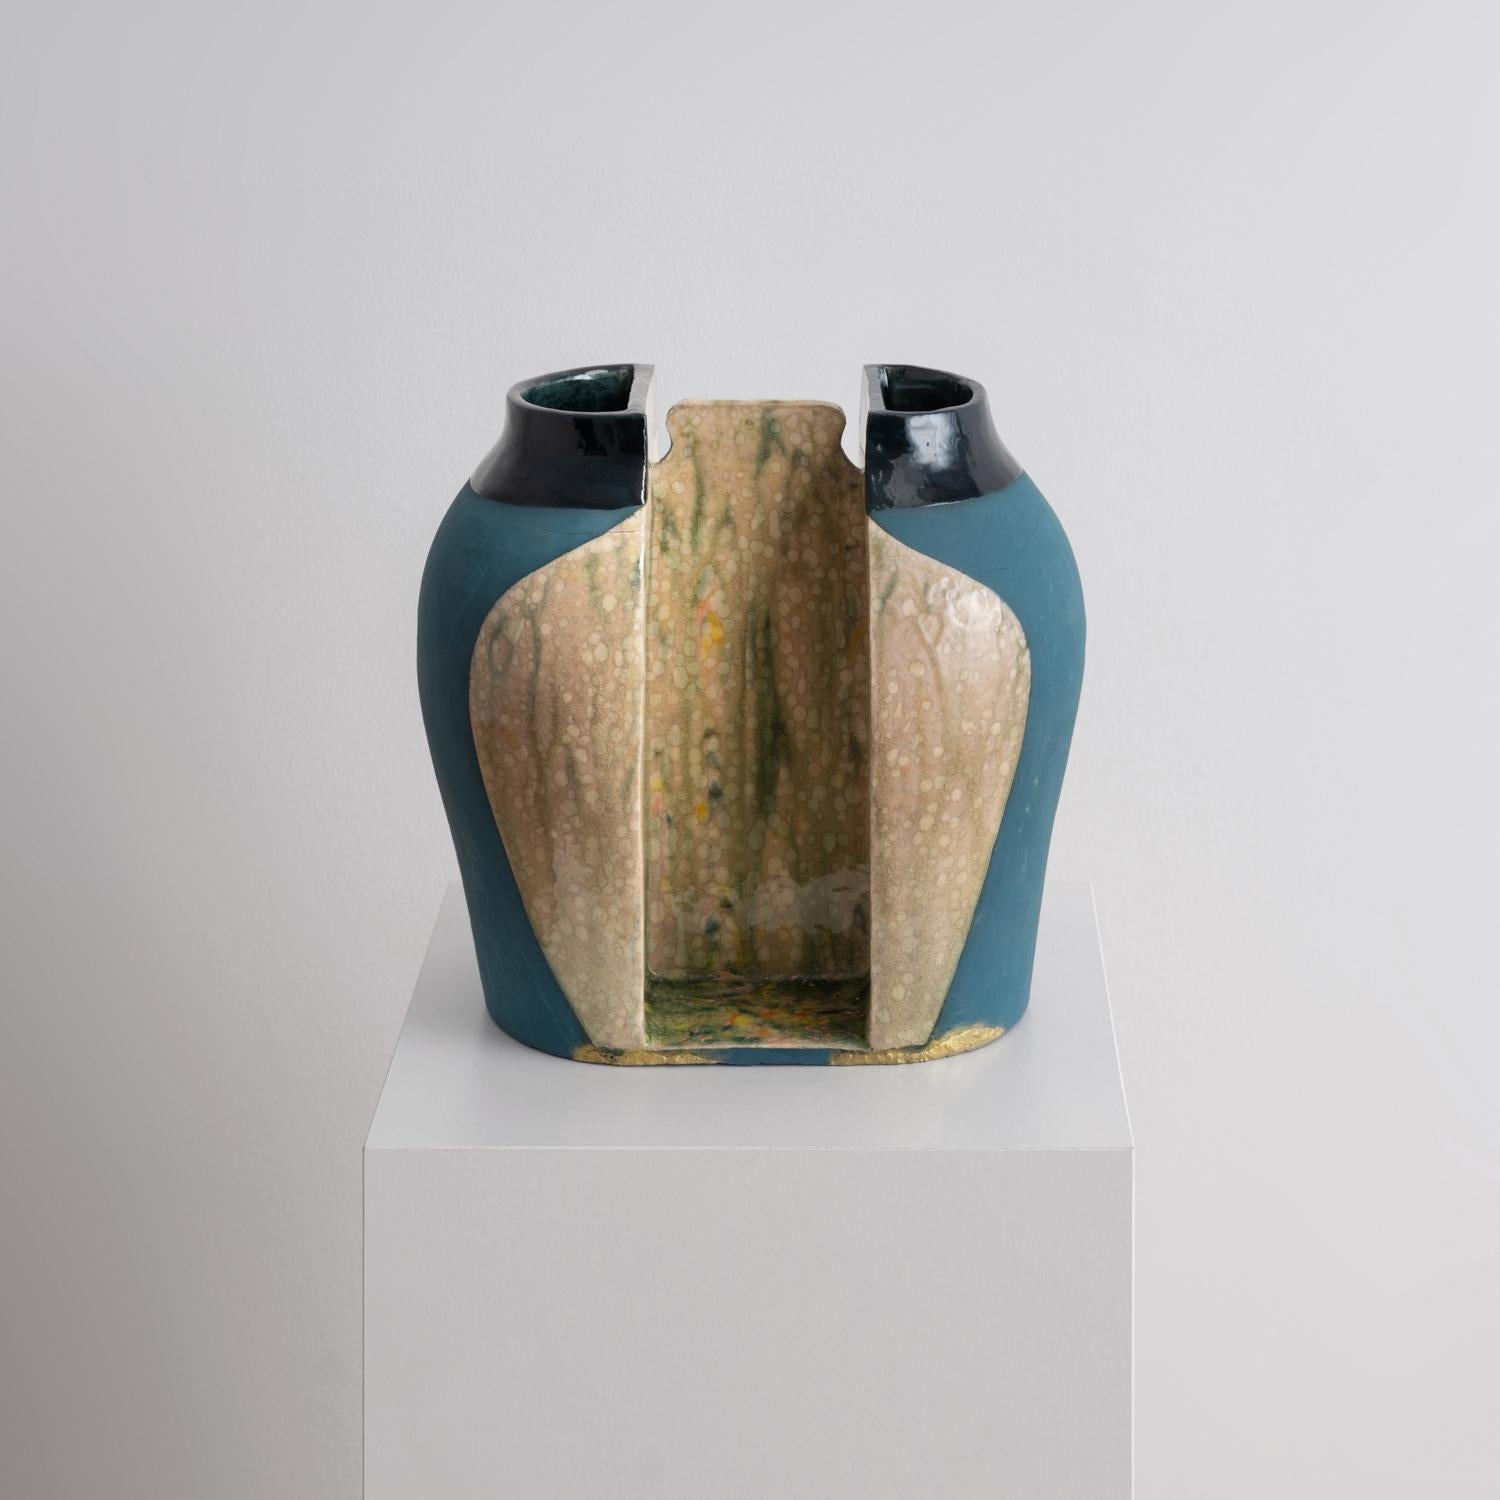 Contemporary Glazed Stoneware & Kintsugi Vessel, entitled 'She, Of Unknown Origin', by Los Angeles-based artist and curator Jenny Hata Blumenfield. 

Mirroring halves of matte peacock-blue with a glossy midnight-blue rim surround the form of a